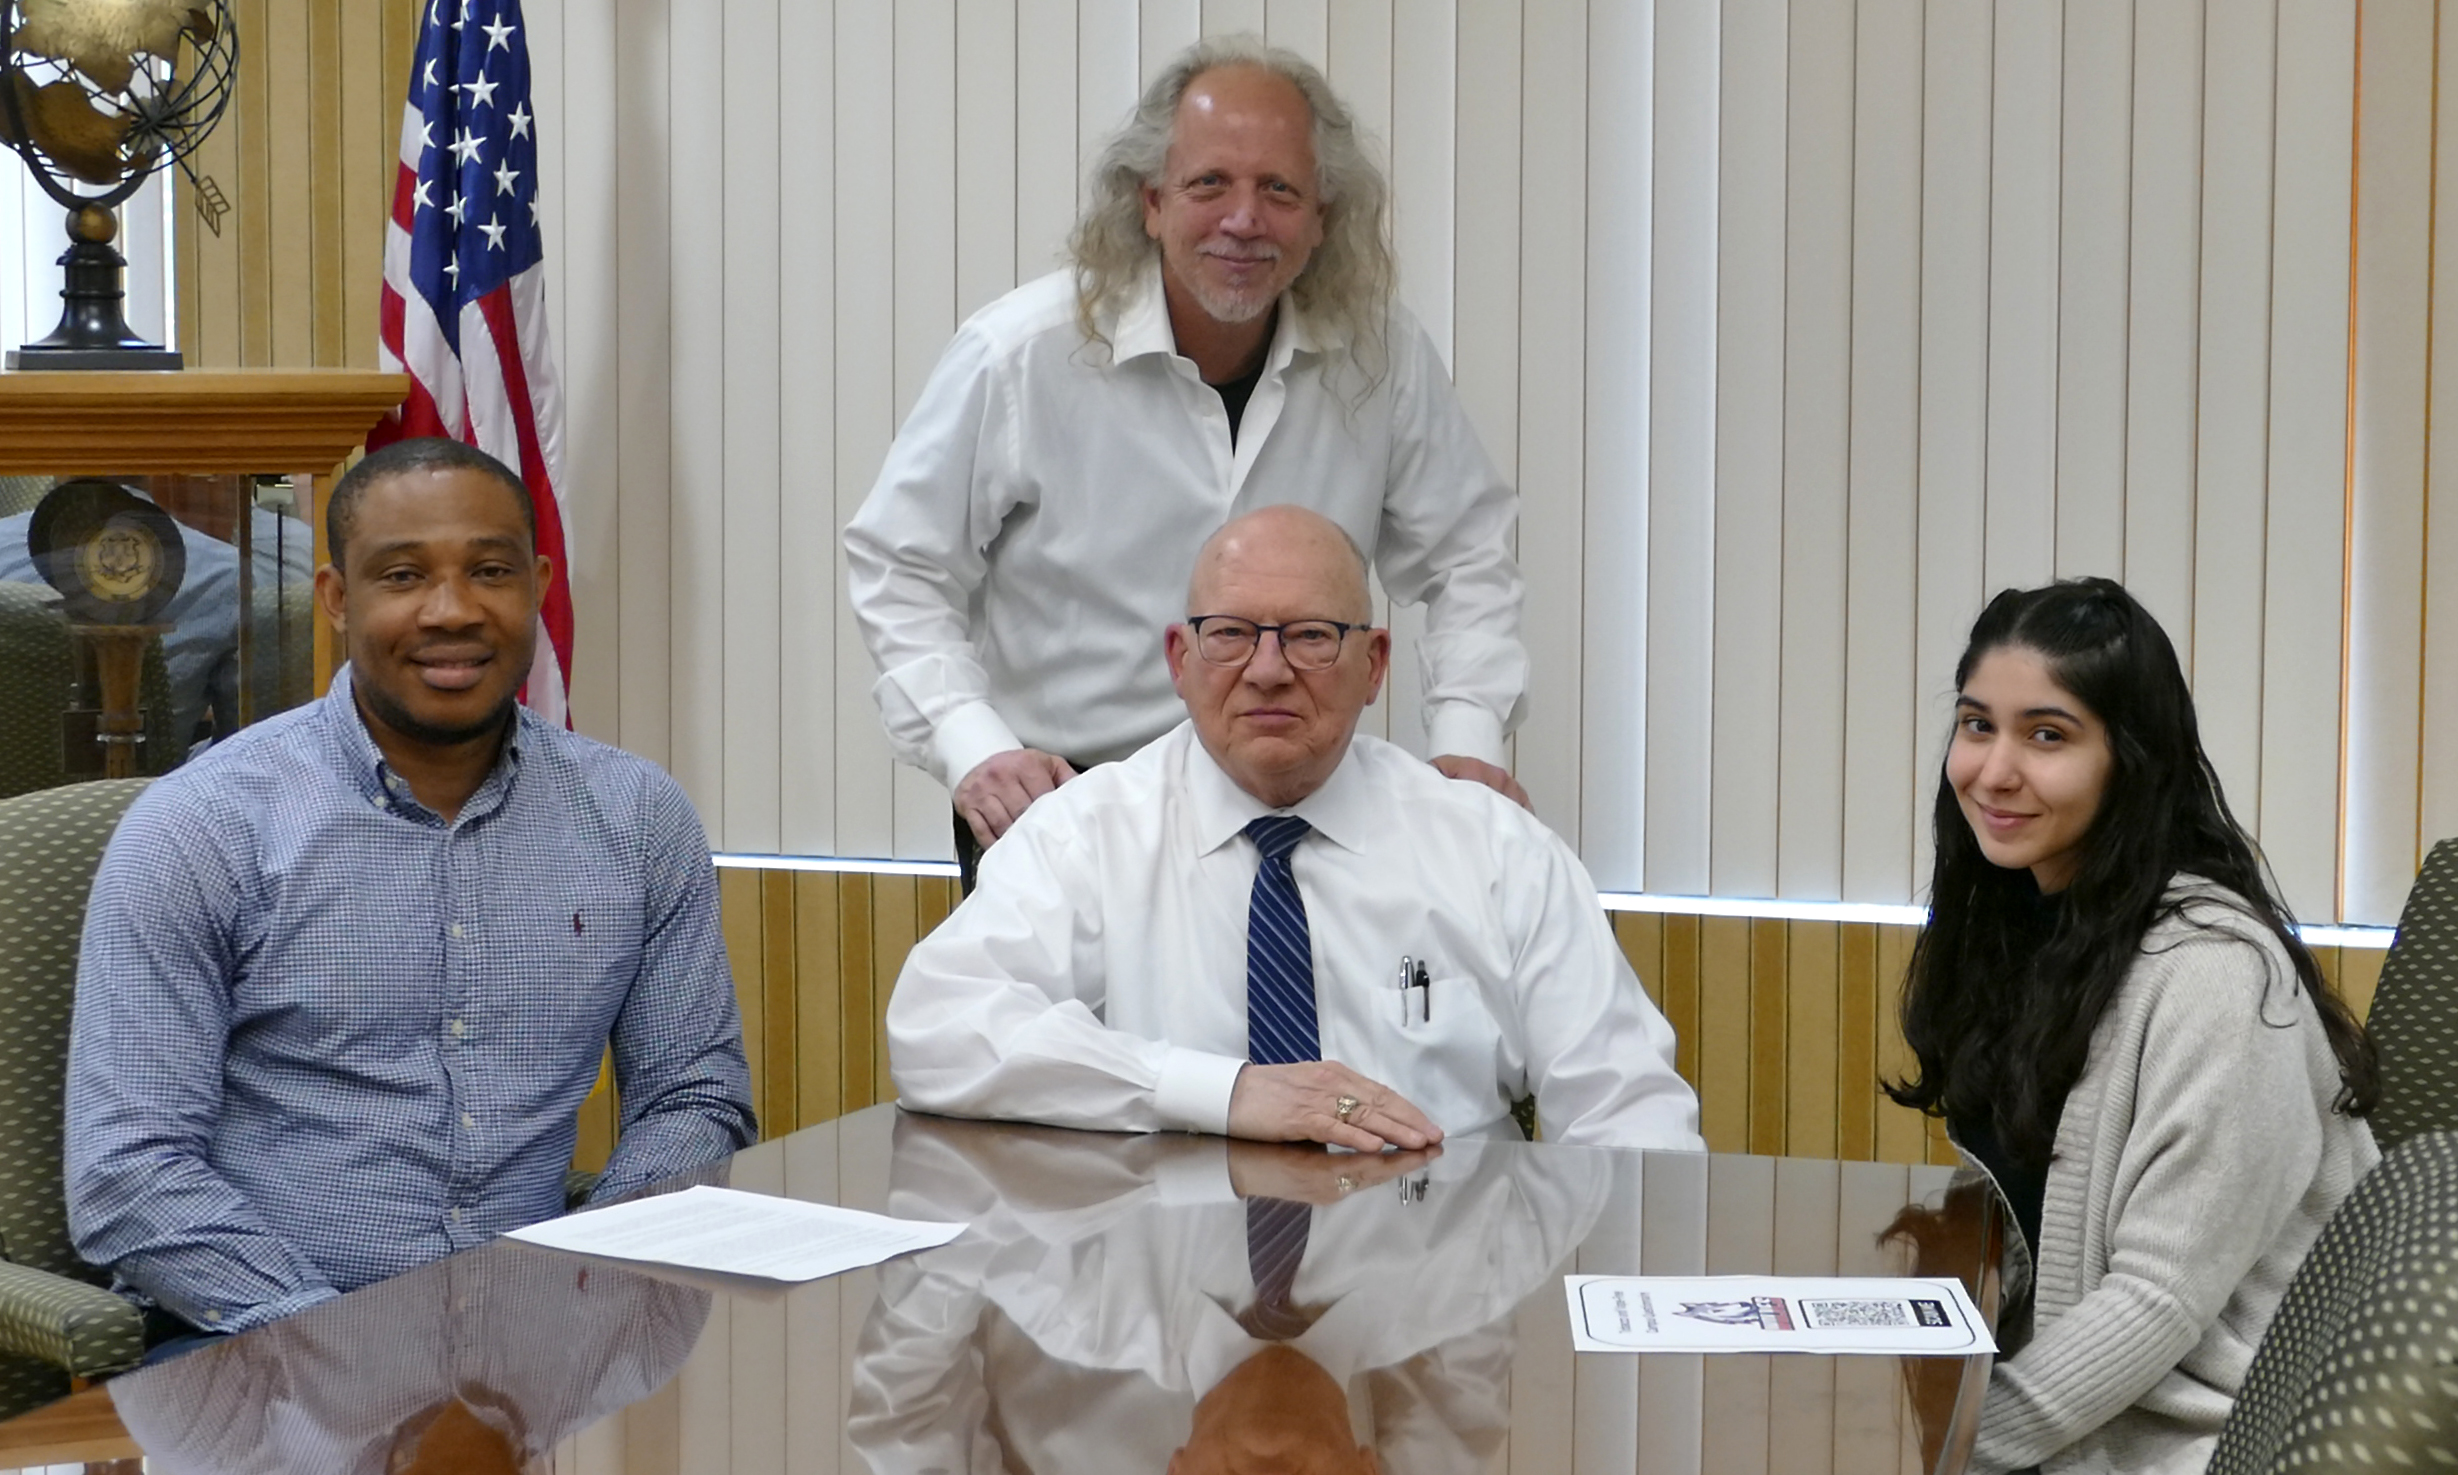 (l-r, seated): Uche Aja, student Campus Leader, Interim President Dr. Paul B. Beran and Keithsany Valentin, student Campus Leader, at the signing ceremony for Western Connecticut State University’s expanded Tobacco and Vape-Free Policy, along with Dr. Jeffrey Schlicht (standing), WCSU policy adviser and HPX professor.